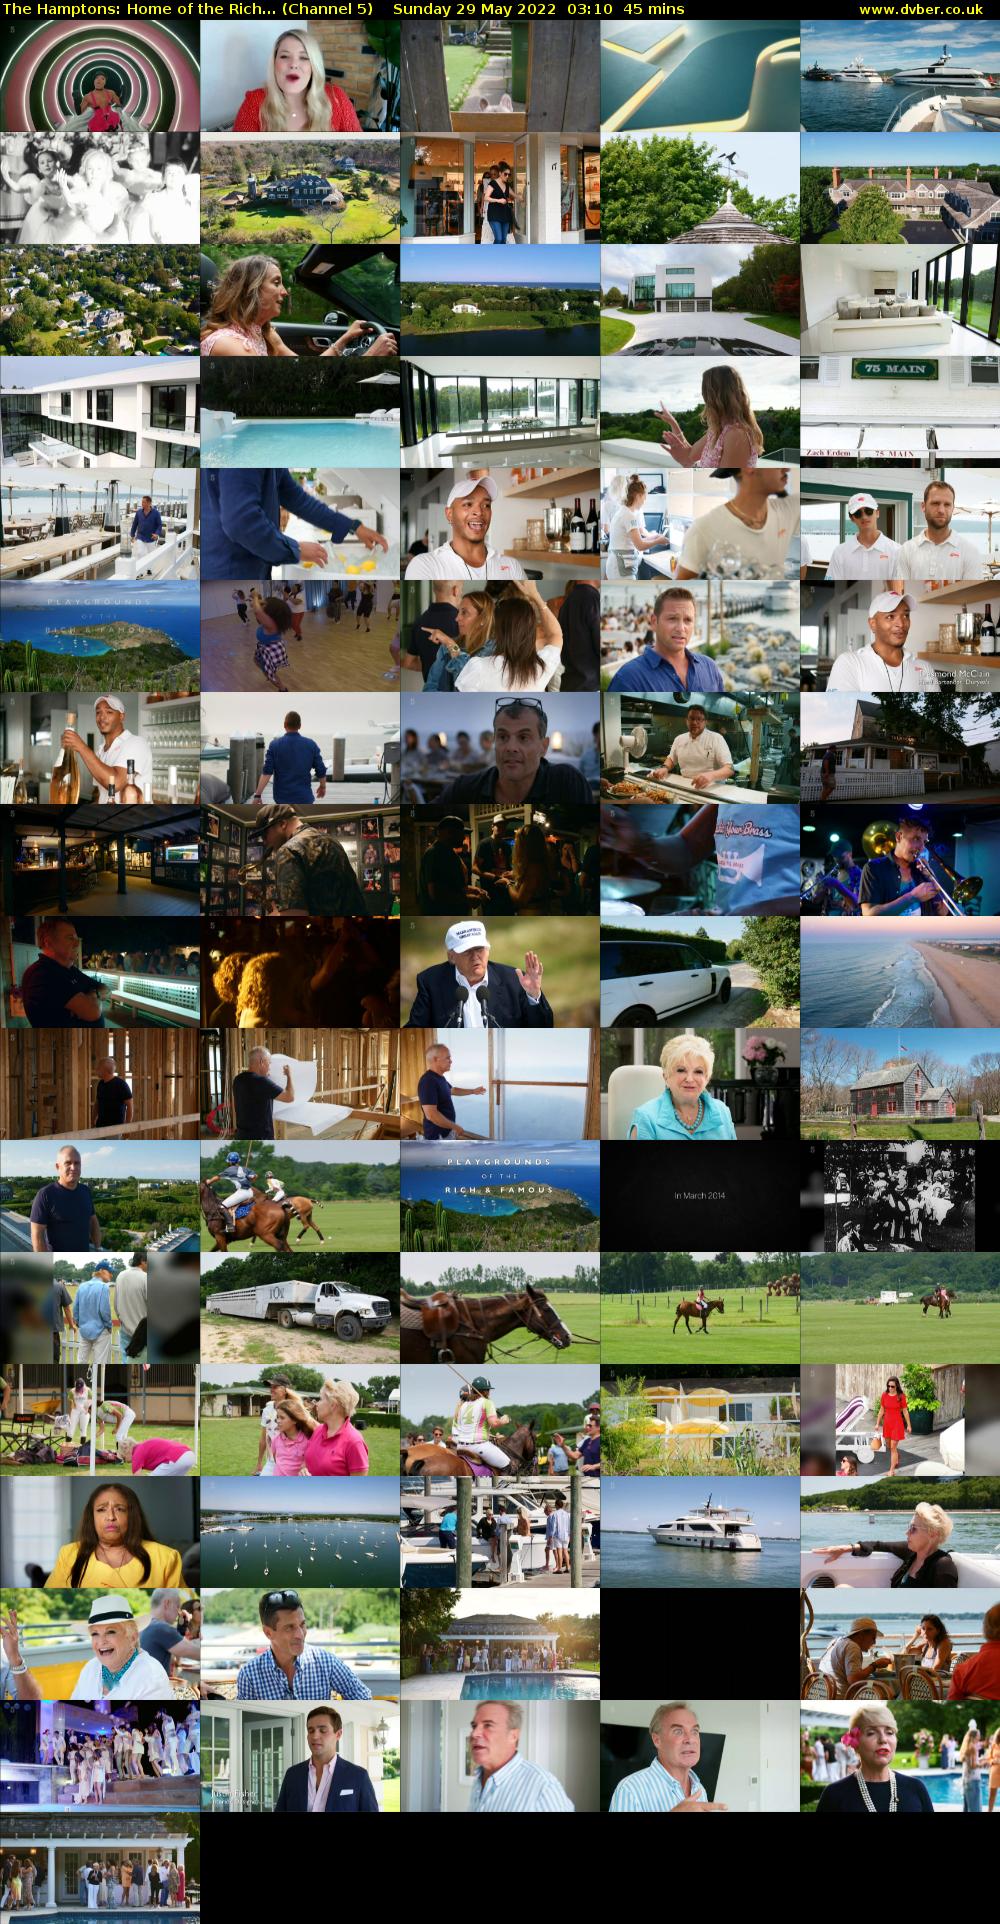 The Hamptons: Home of the Rich... (Channel 5) Sunday 29 May 2022 03:10 - 03:55